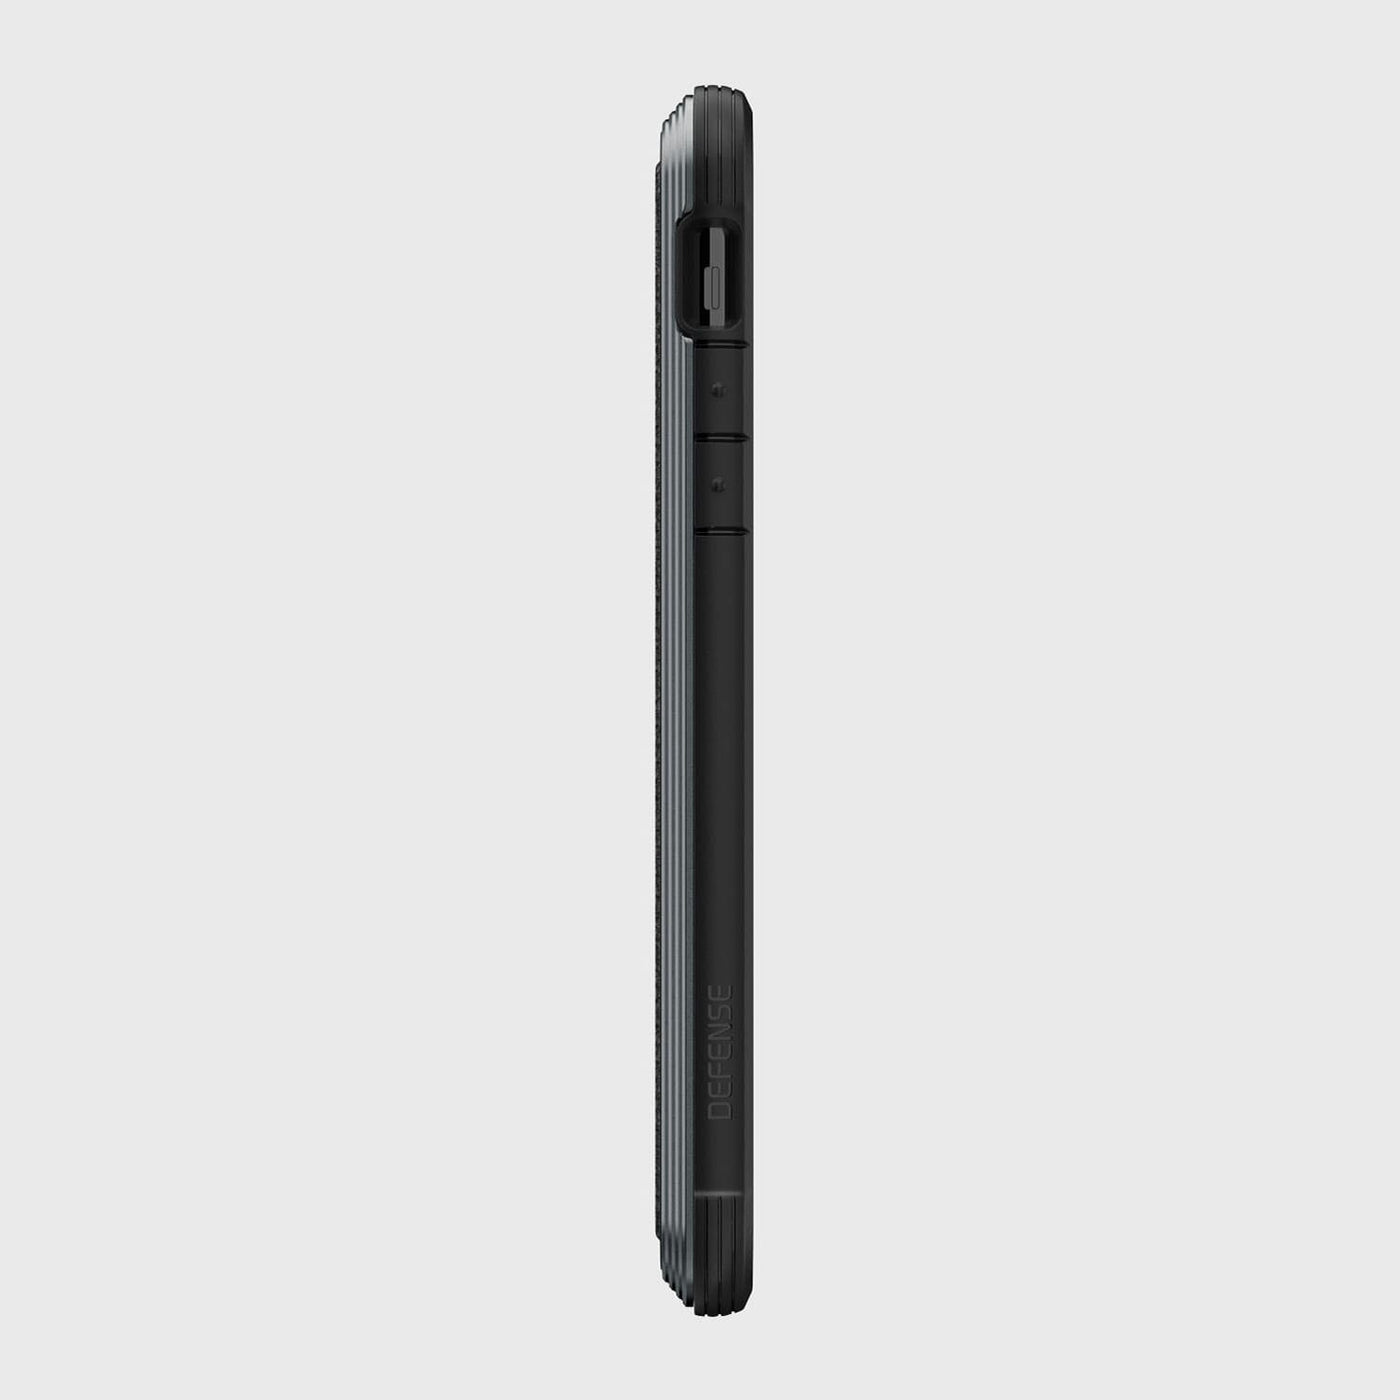 Luxurious Case for iPhone 11 Pro Max. Raptic Lux in black carbon fiber.